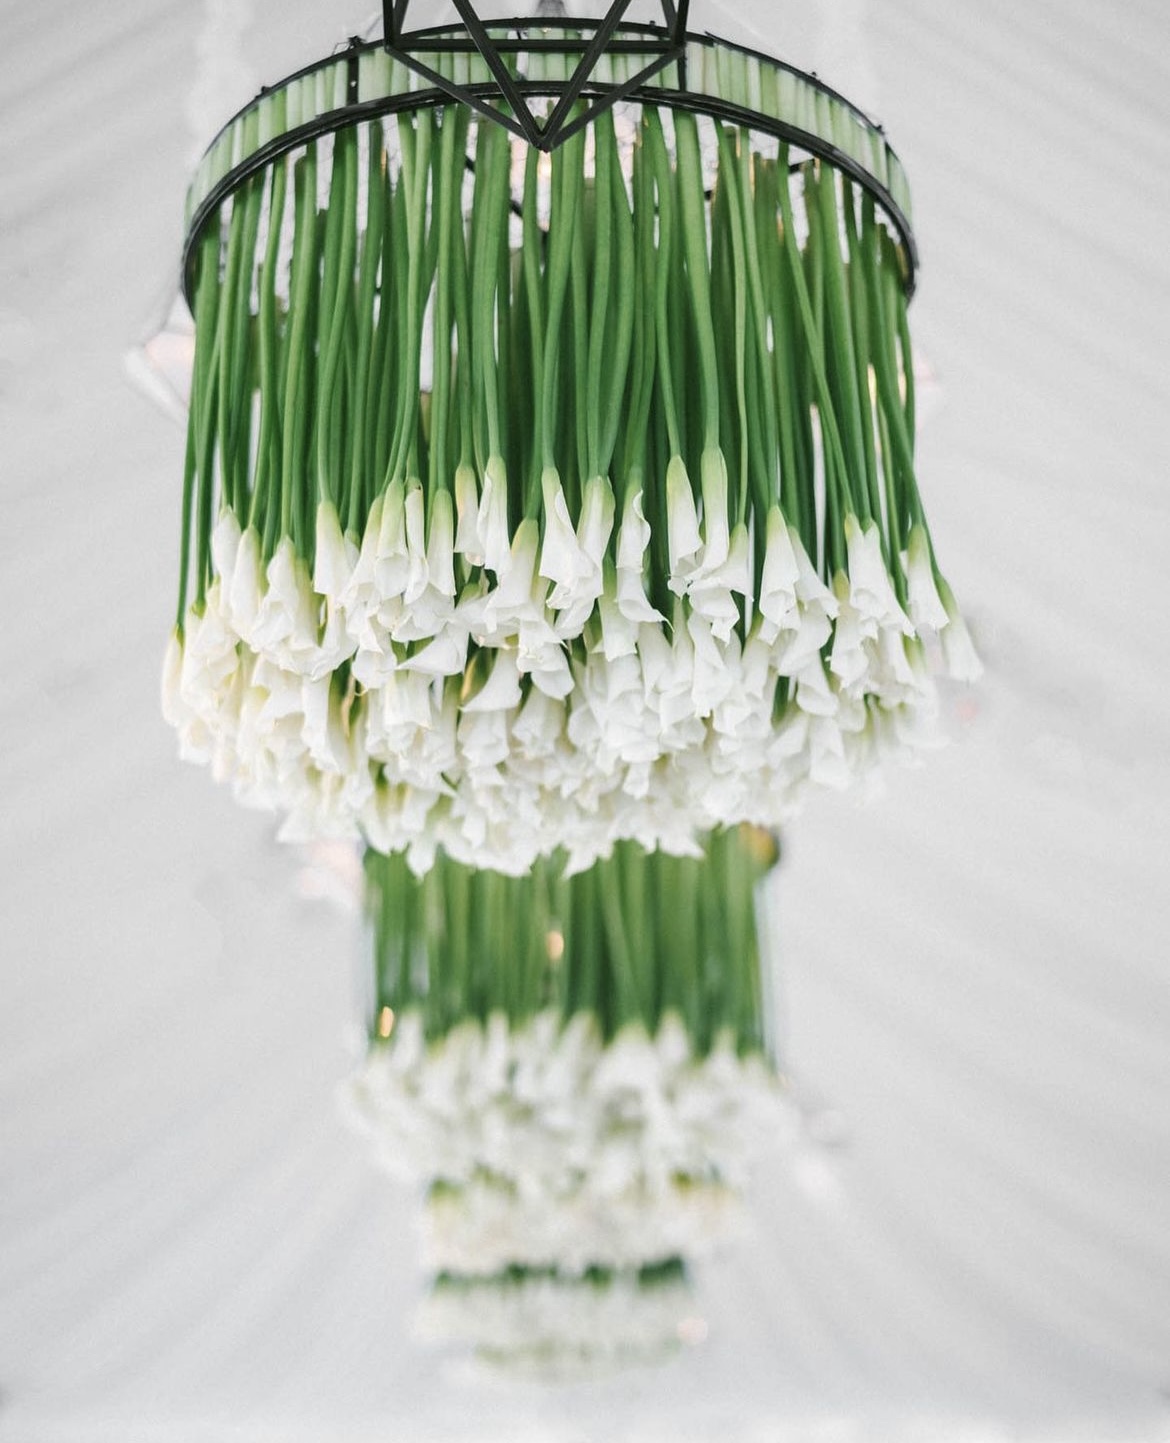 A floral light fixture for a tented wedding.